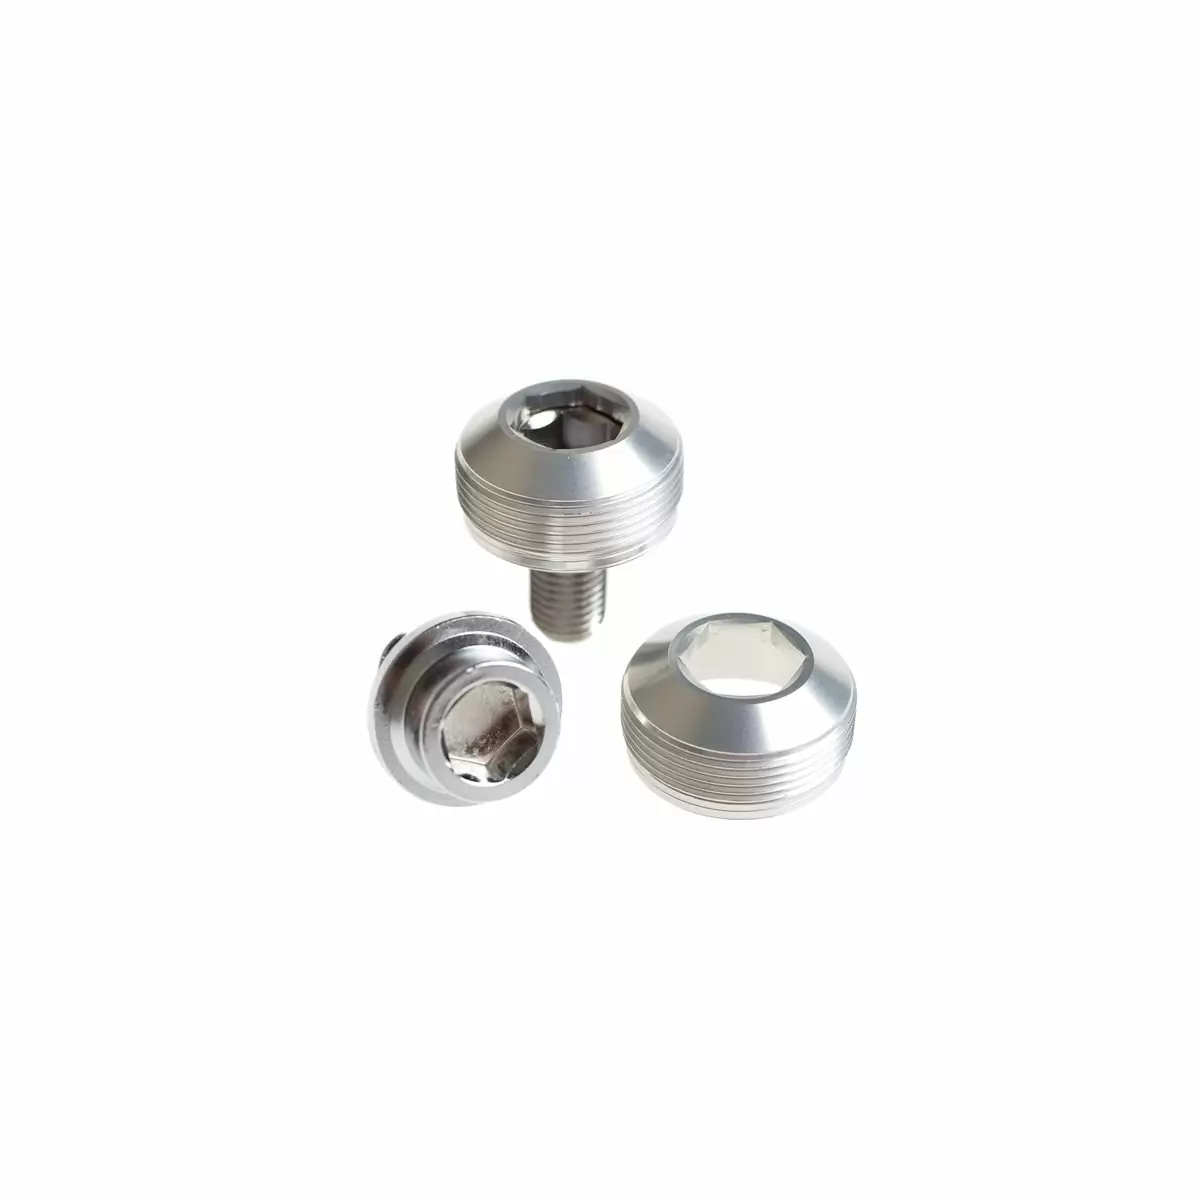 Alloy cup crank bolts with dust cover silver - image